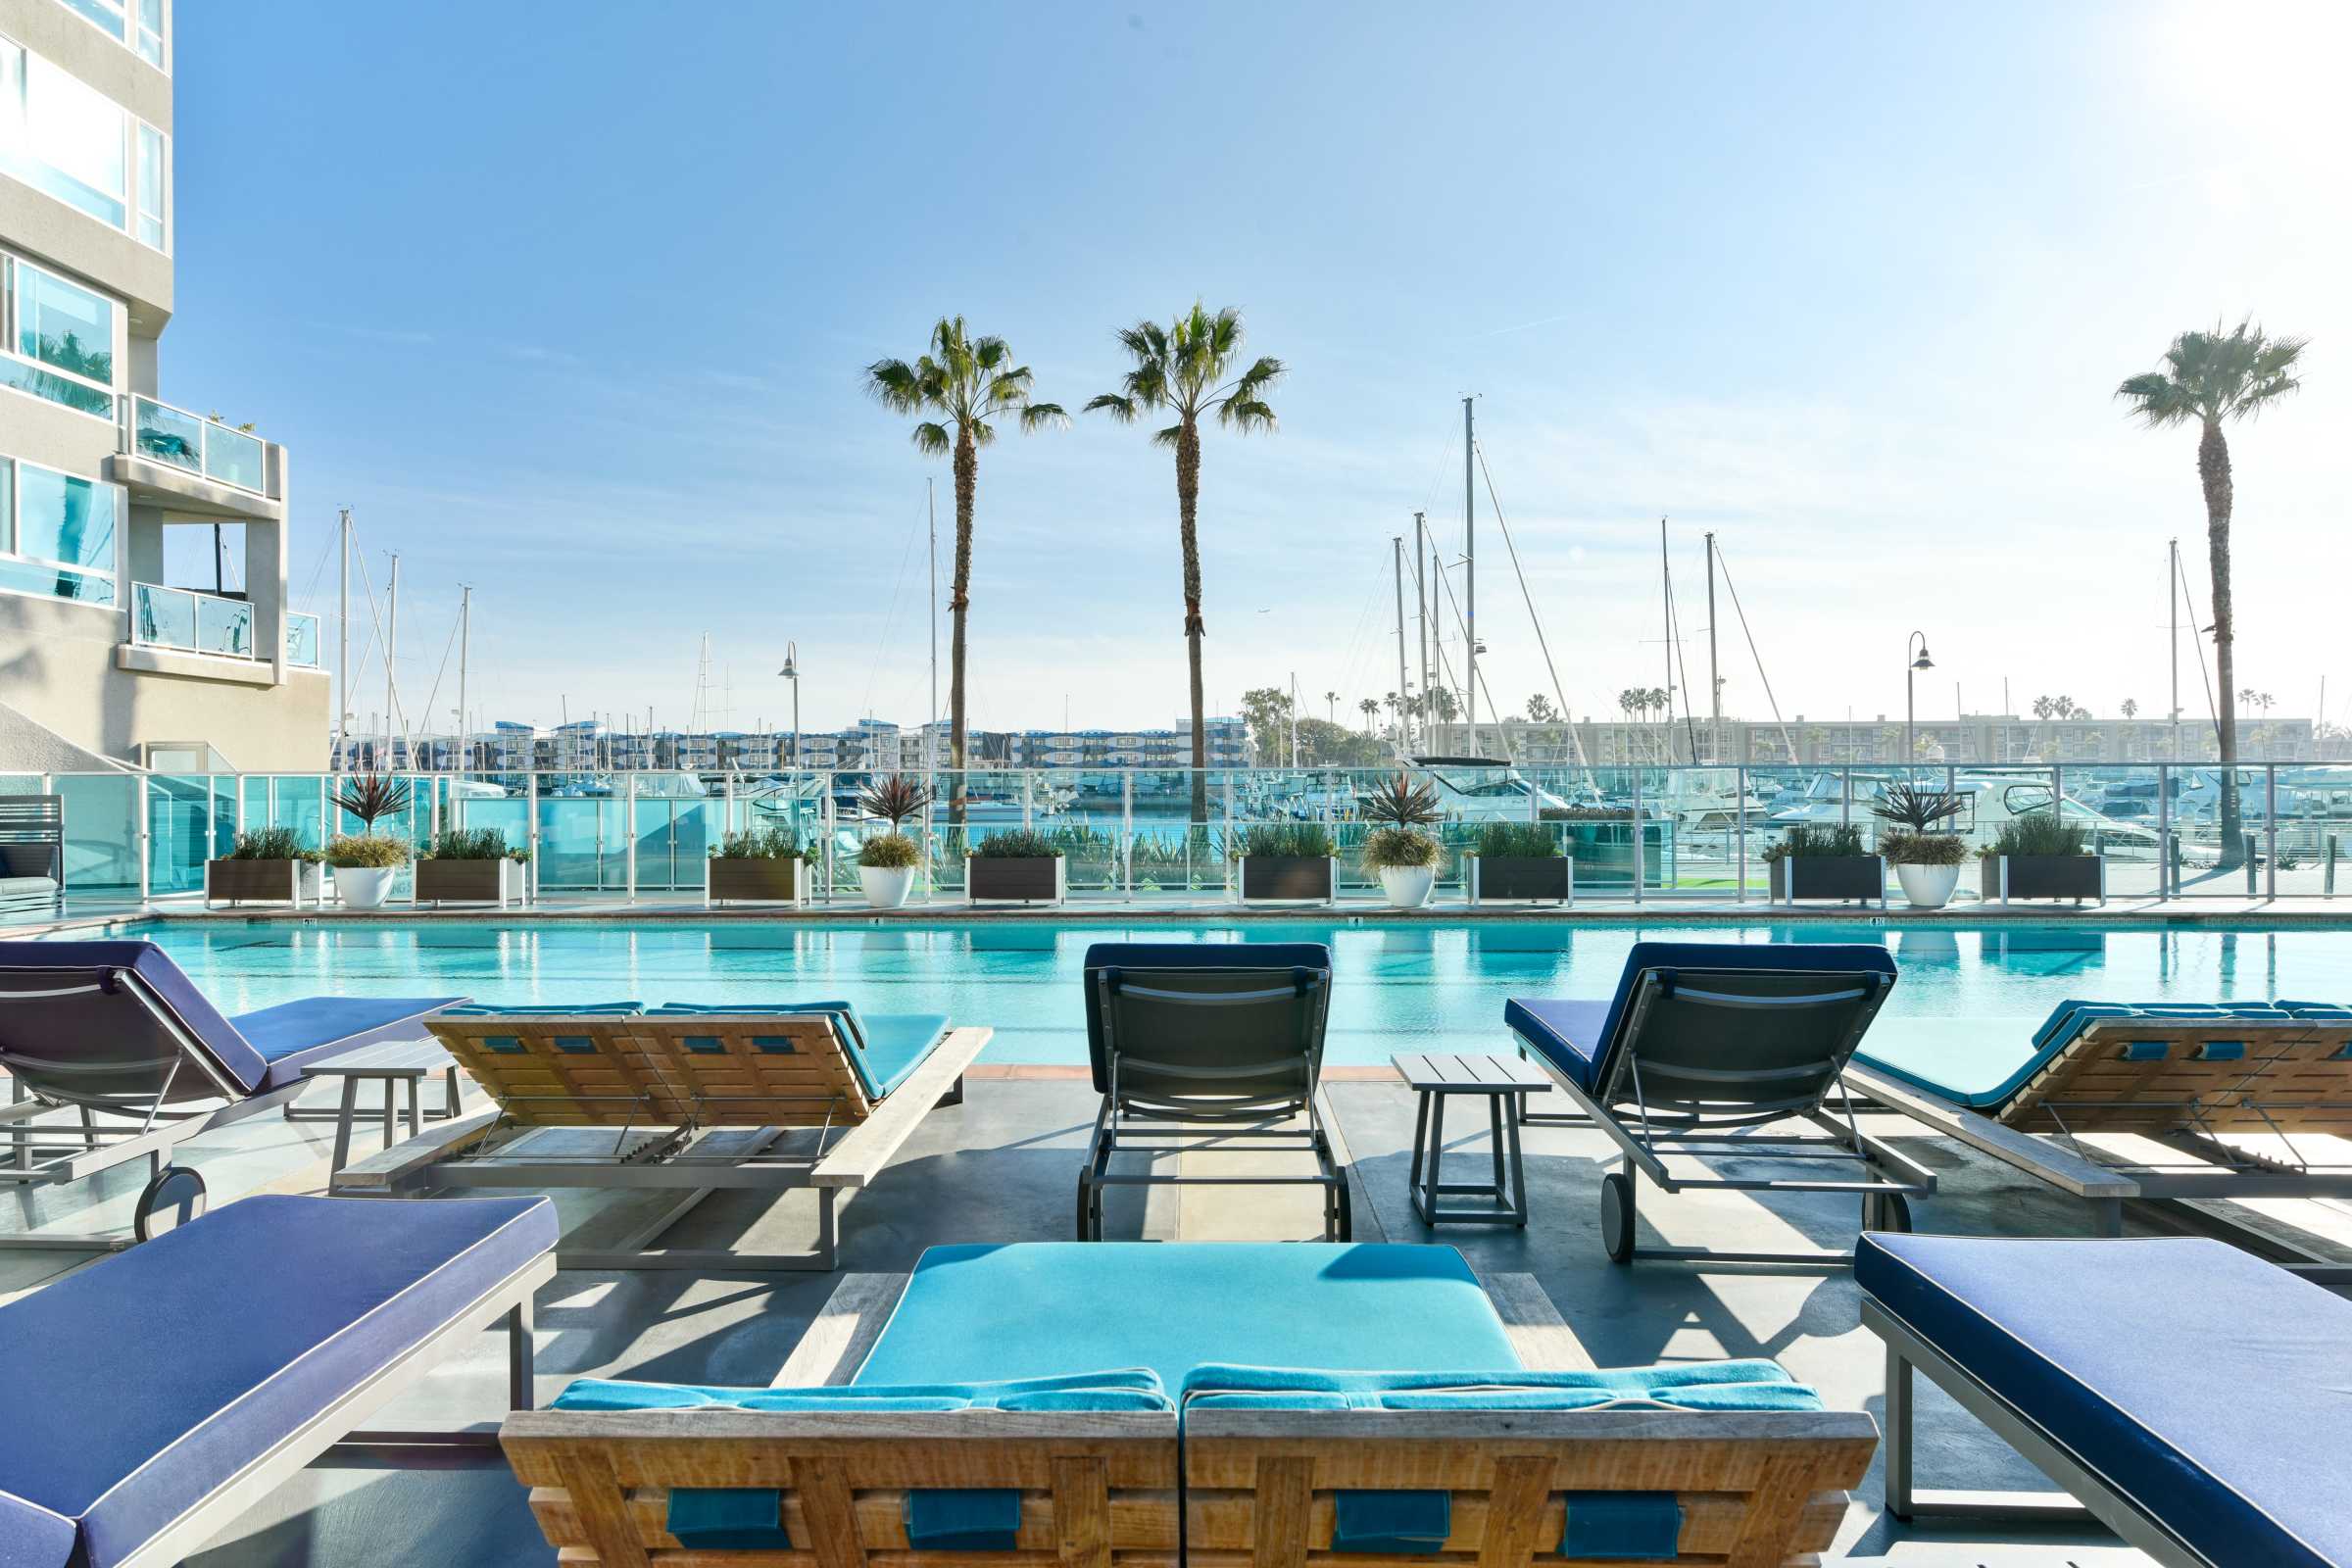 Pool and Lounge at Esprit in Marina del Rey in Los Angeles, California